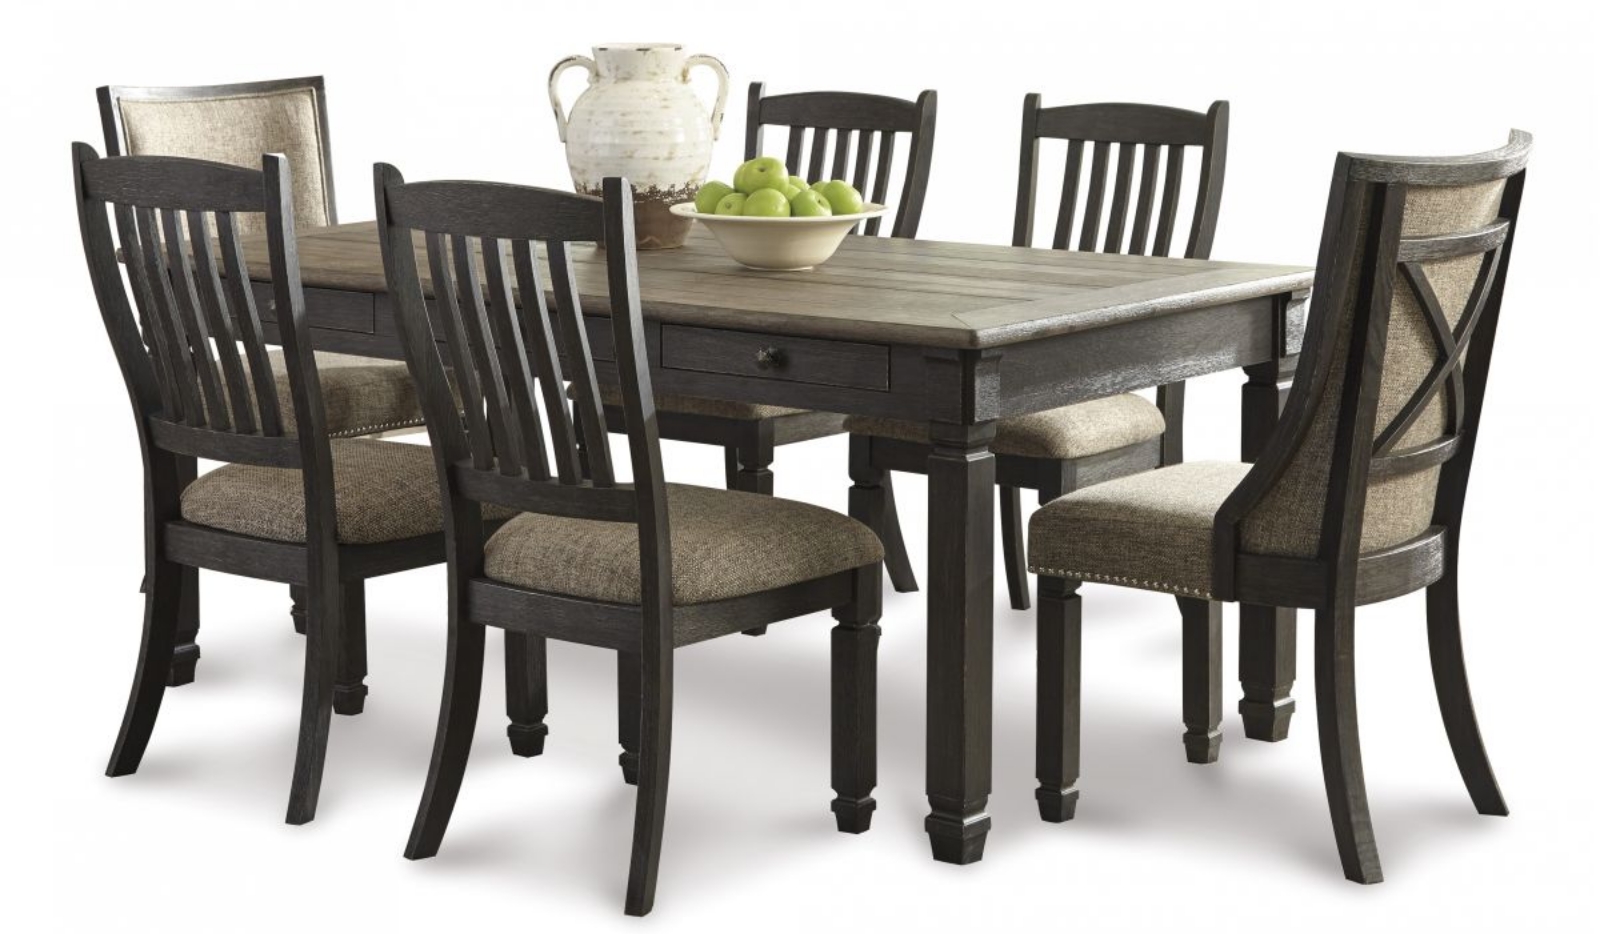 Picture of Tyler Creek Dining Table & 6 Chairs